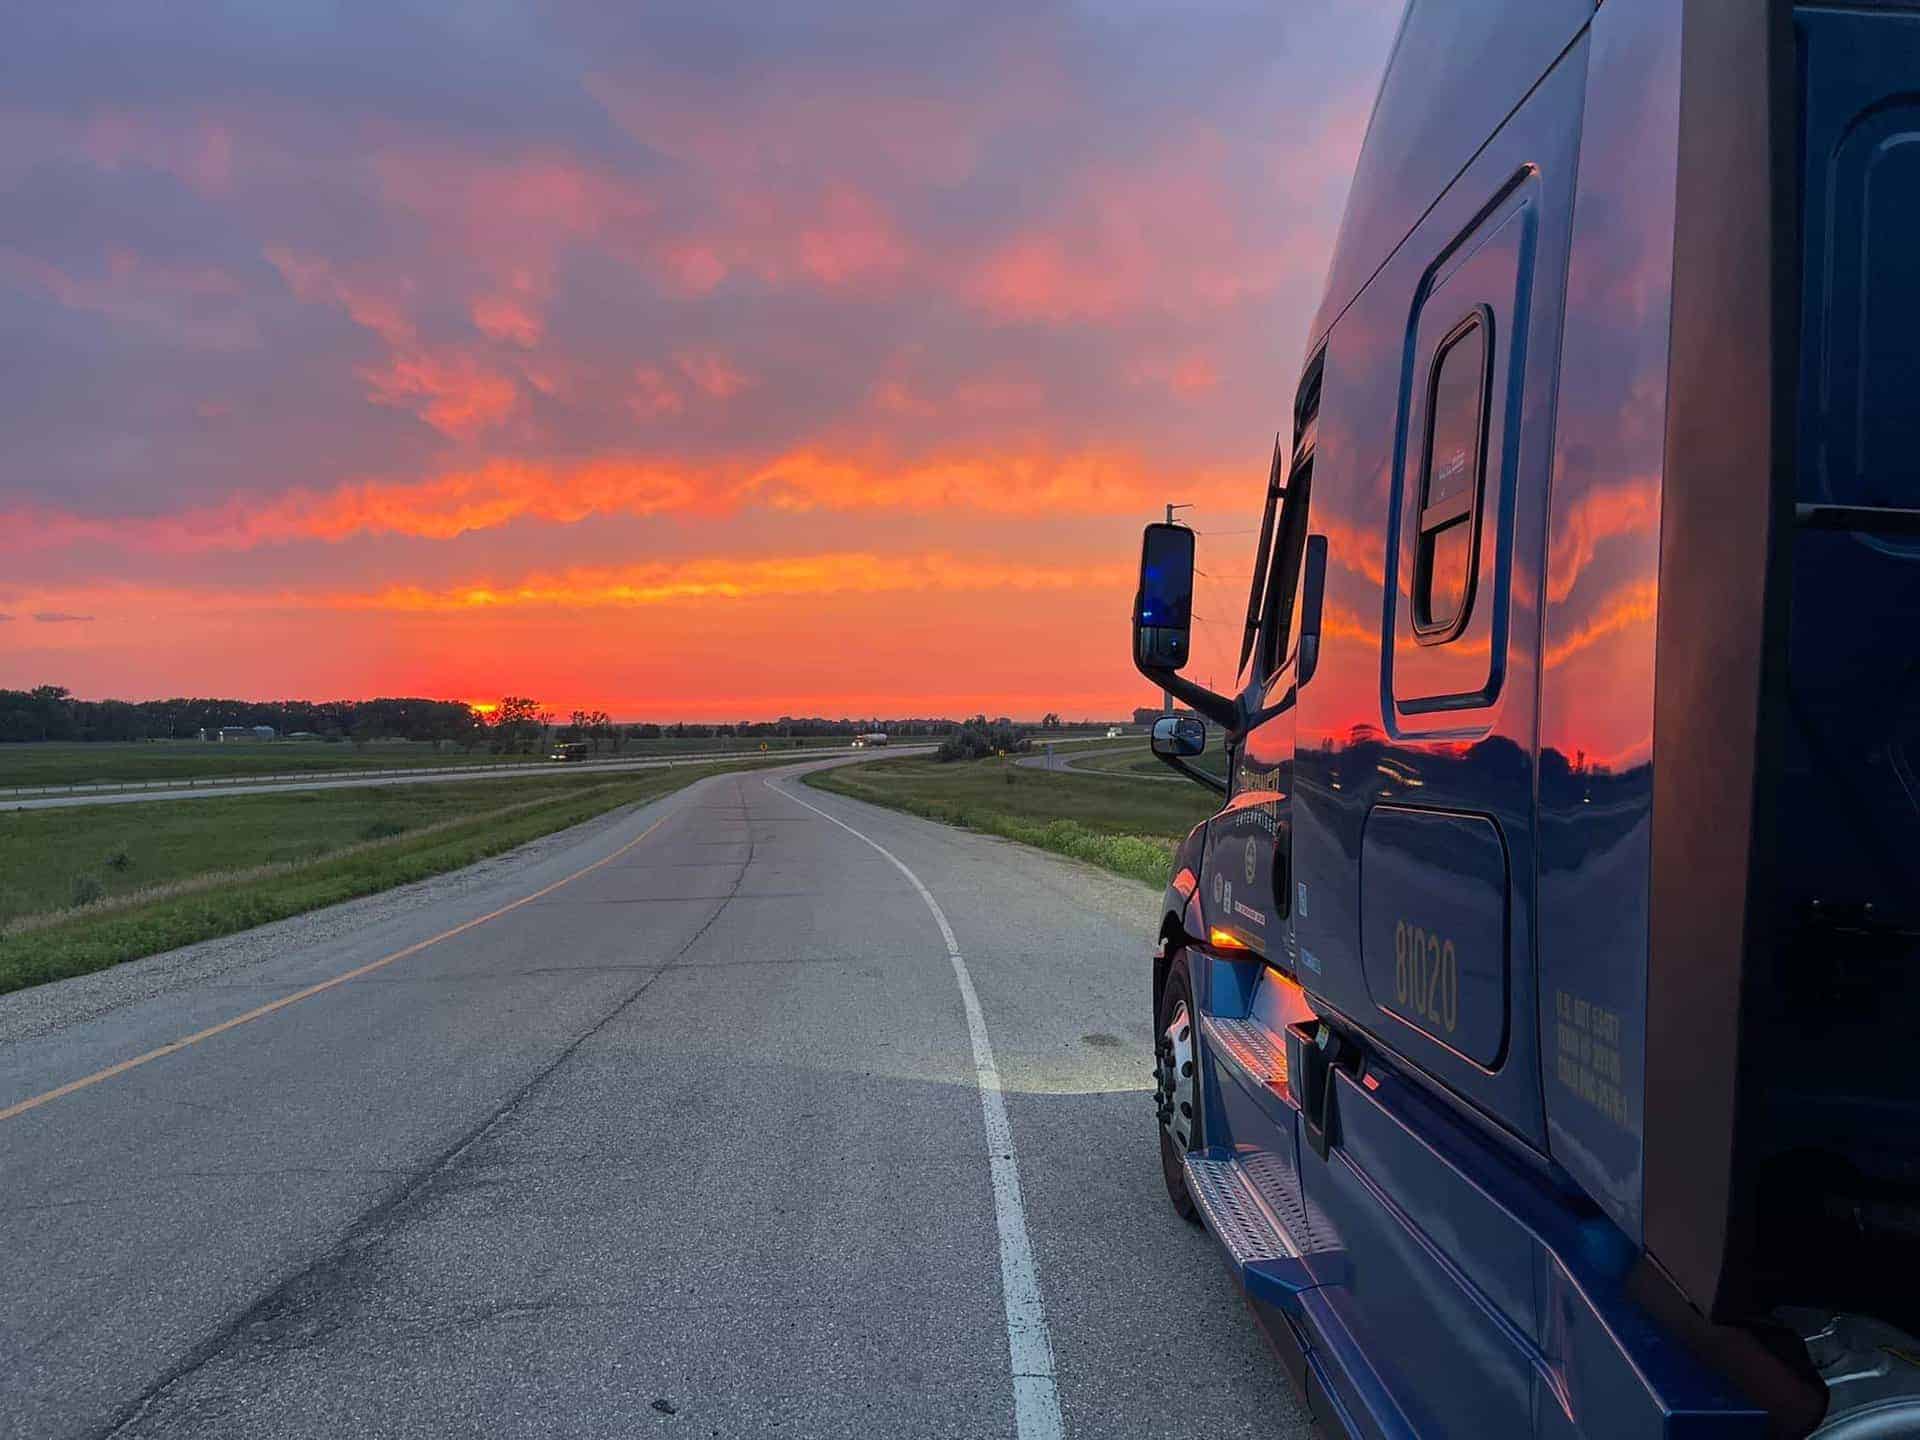 Werner truck with sunset in background